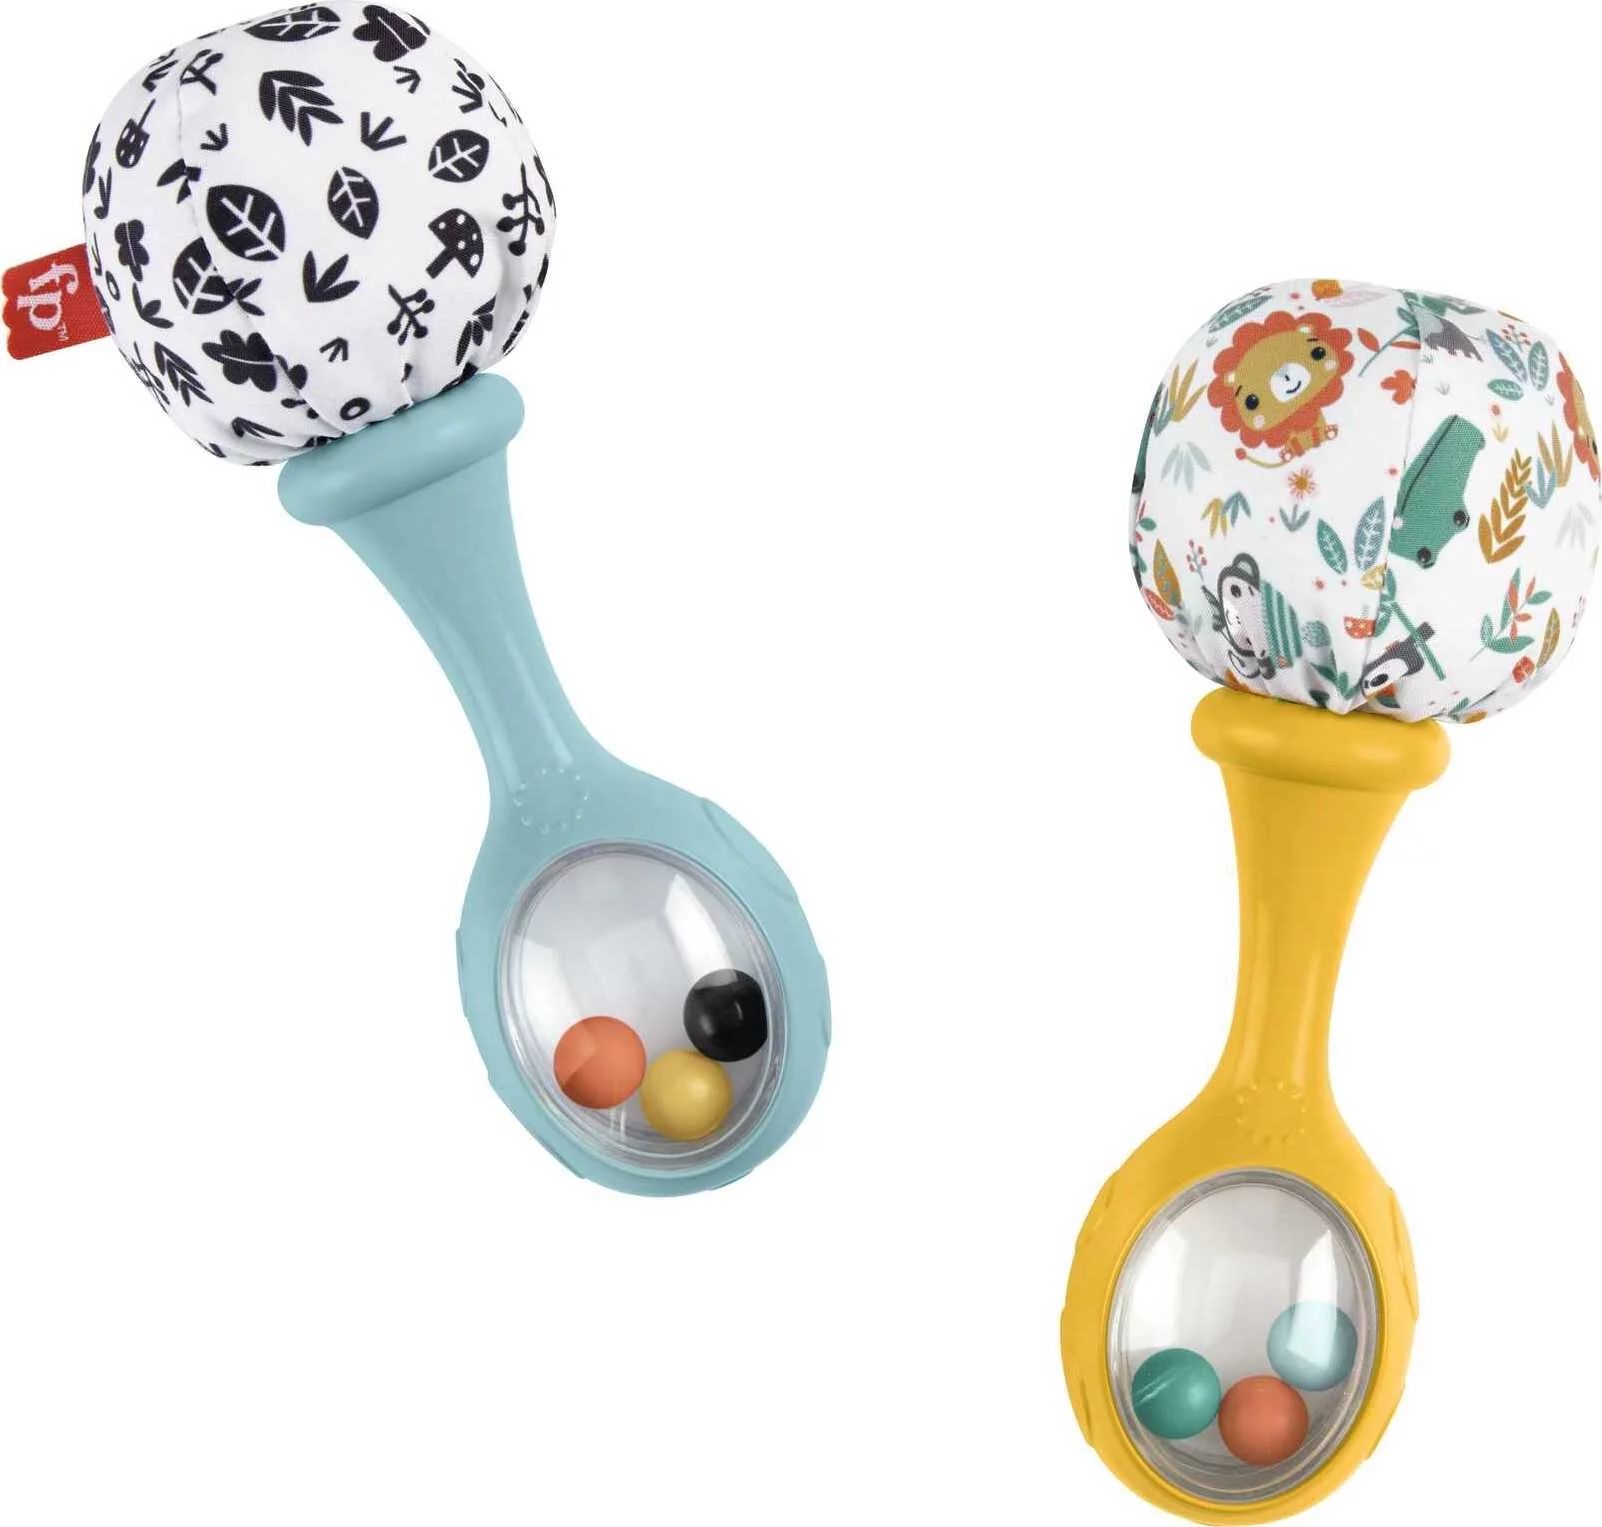 Fisher-Price Baby Rattle ‘n Rock Maracas Toys, Set of 2 for Infants 3+ Months, High Contrast | Walmart (US)